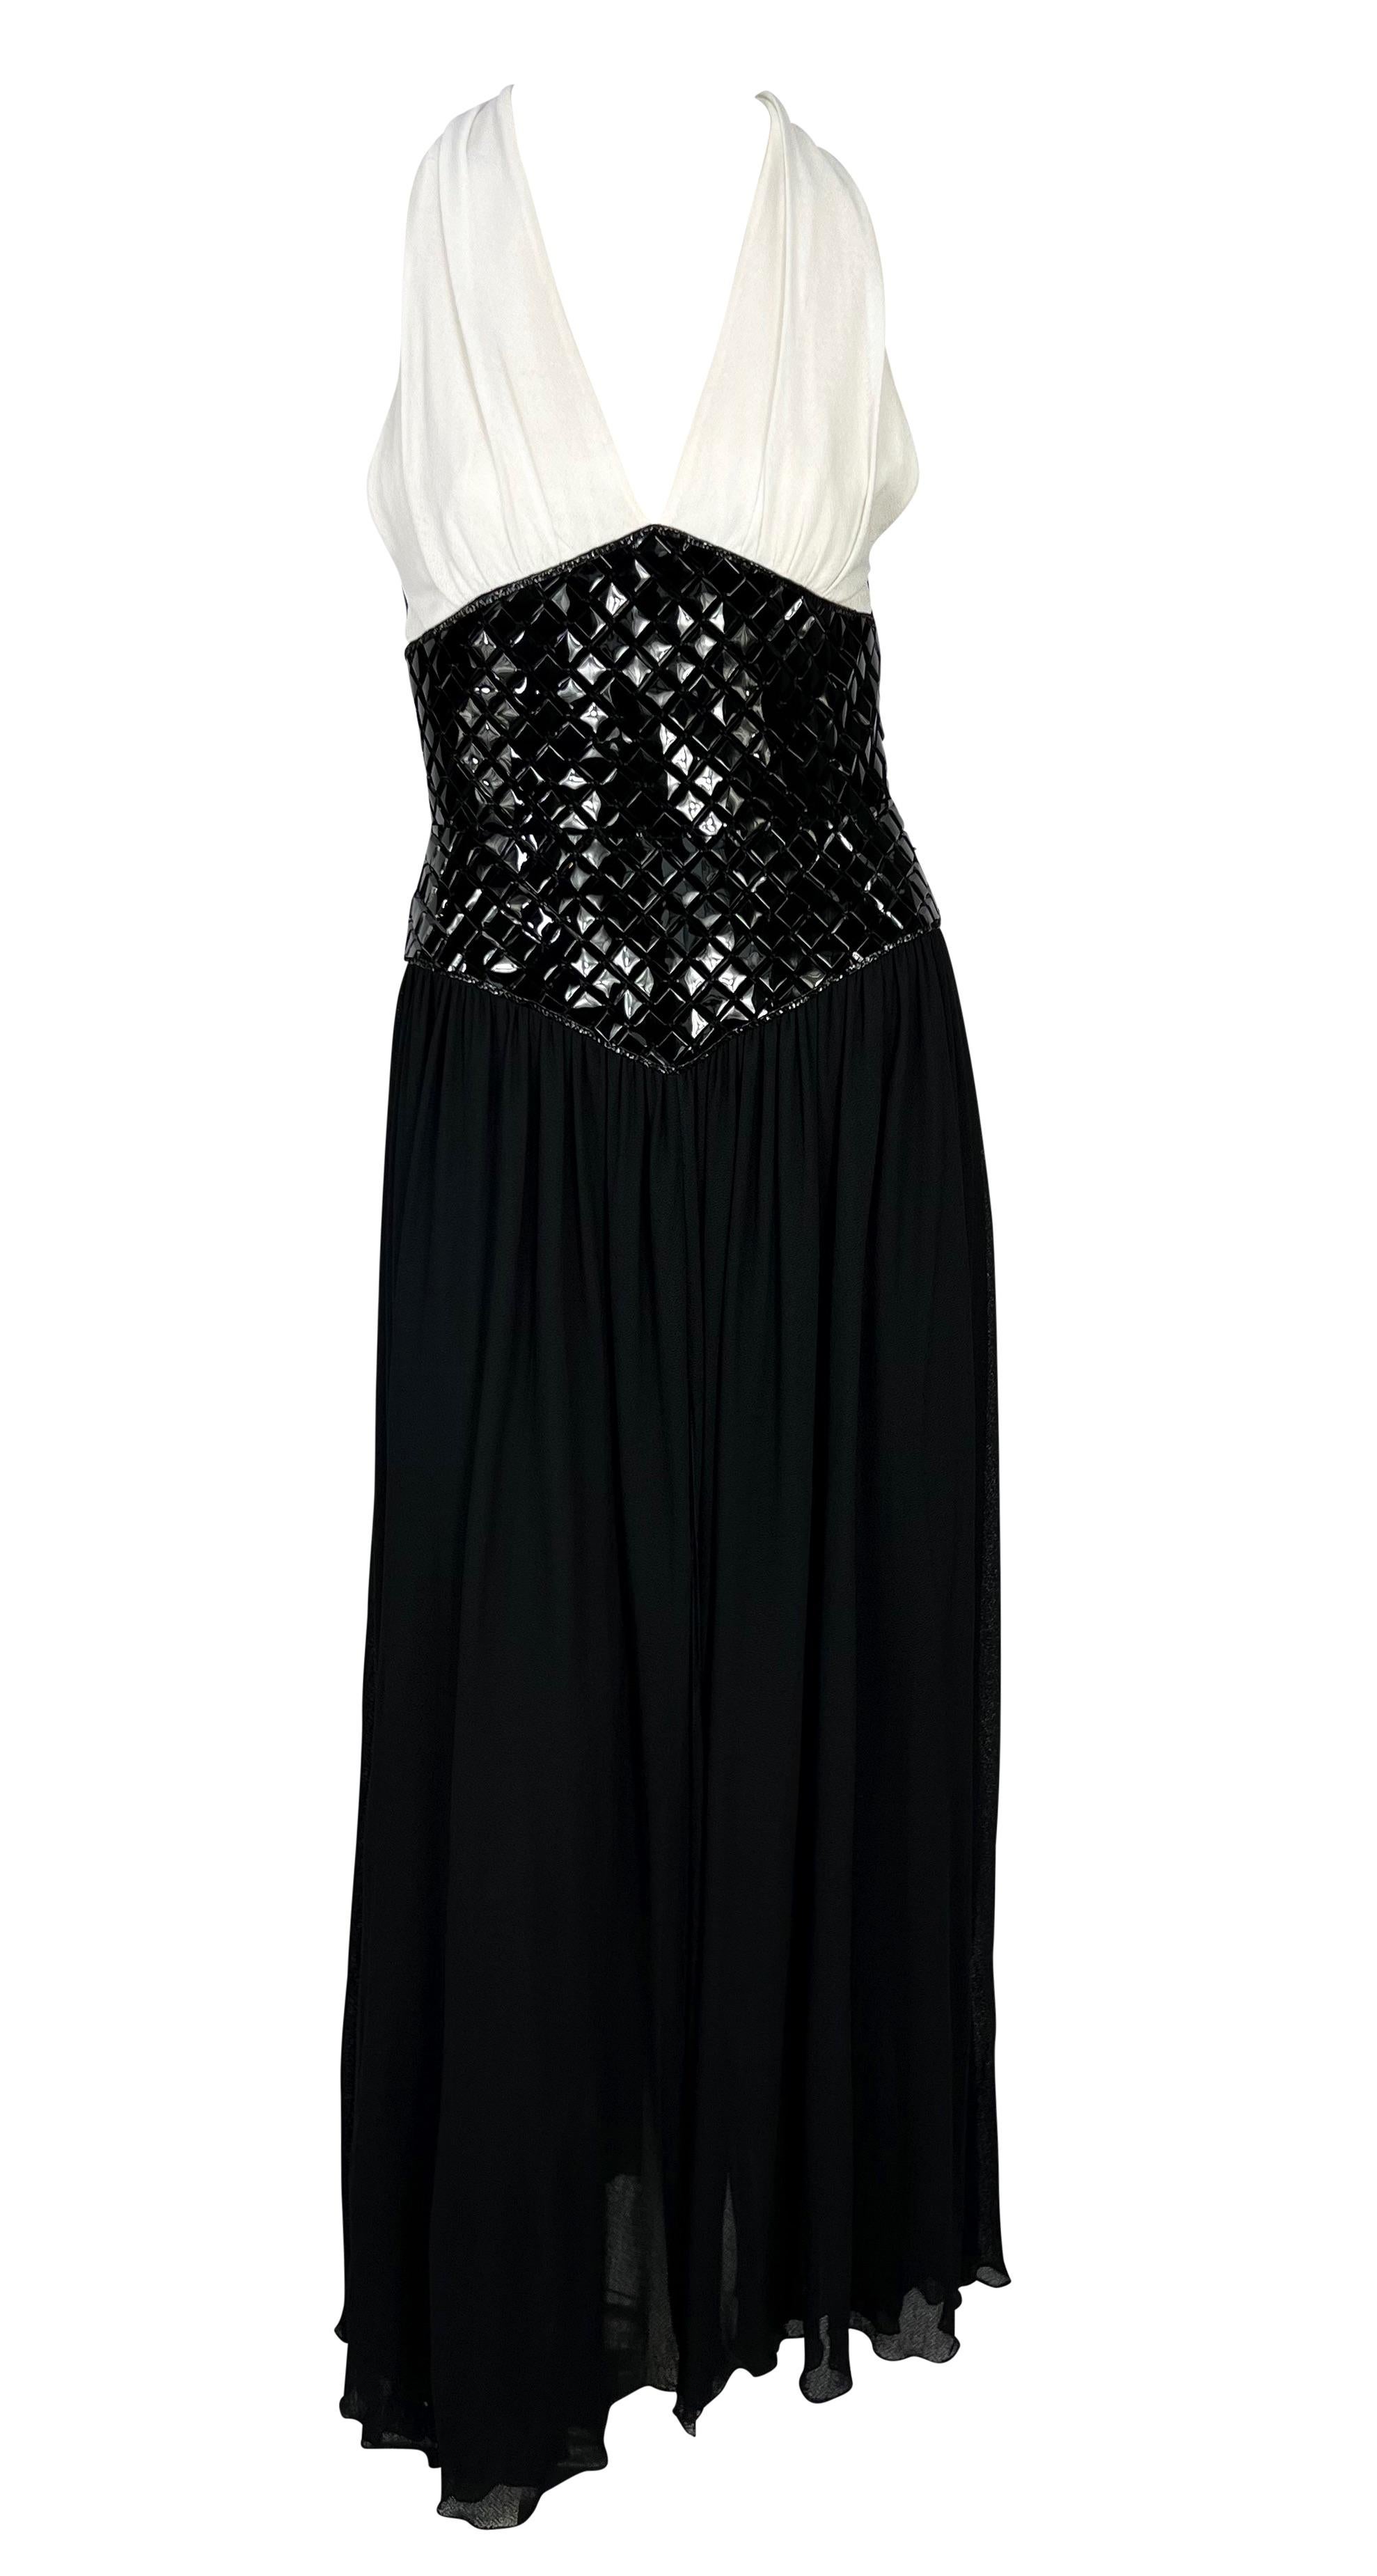 S/S 1995 Chanel by Karl Lagerfeld Diamond Appliqué Corset Chiffon Halter Gown In Good Condition In West Hollywood, CA